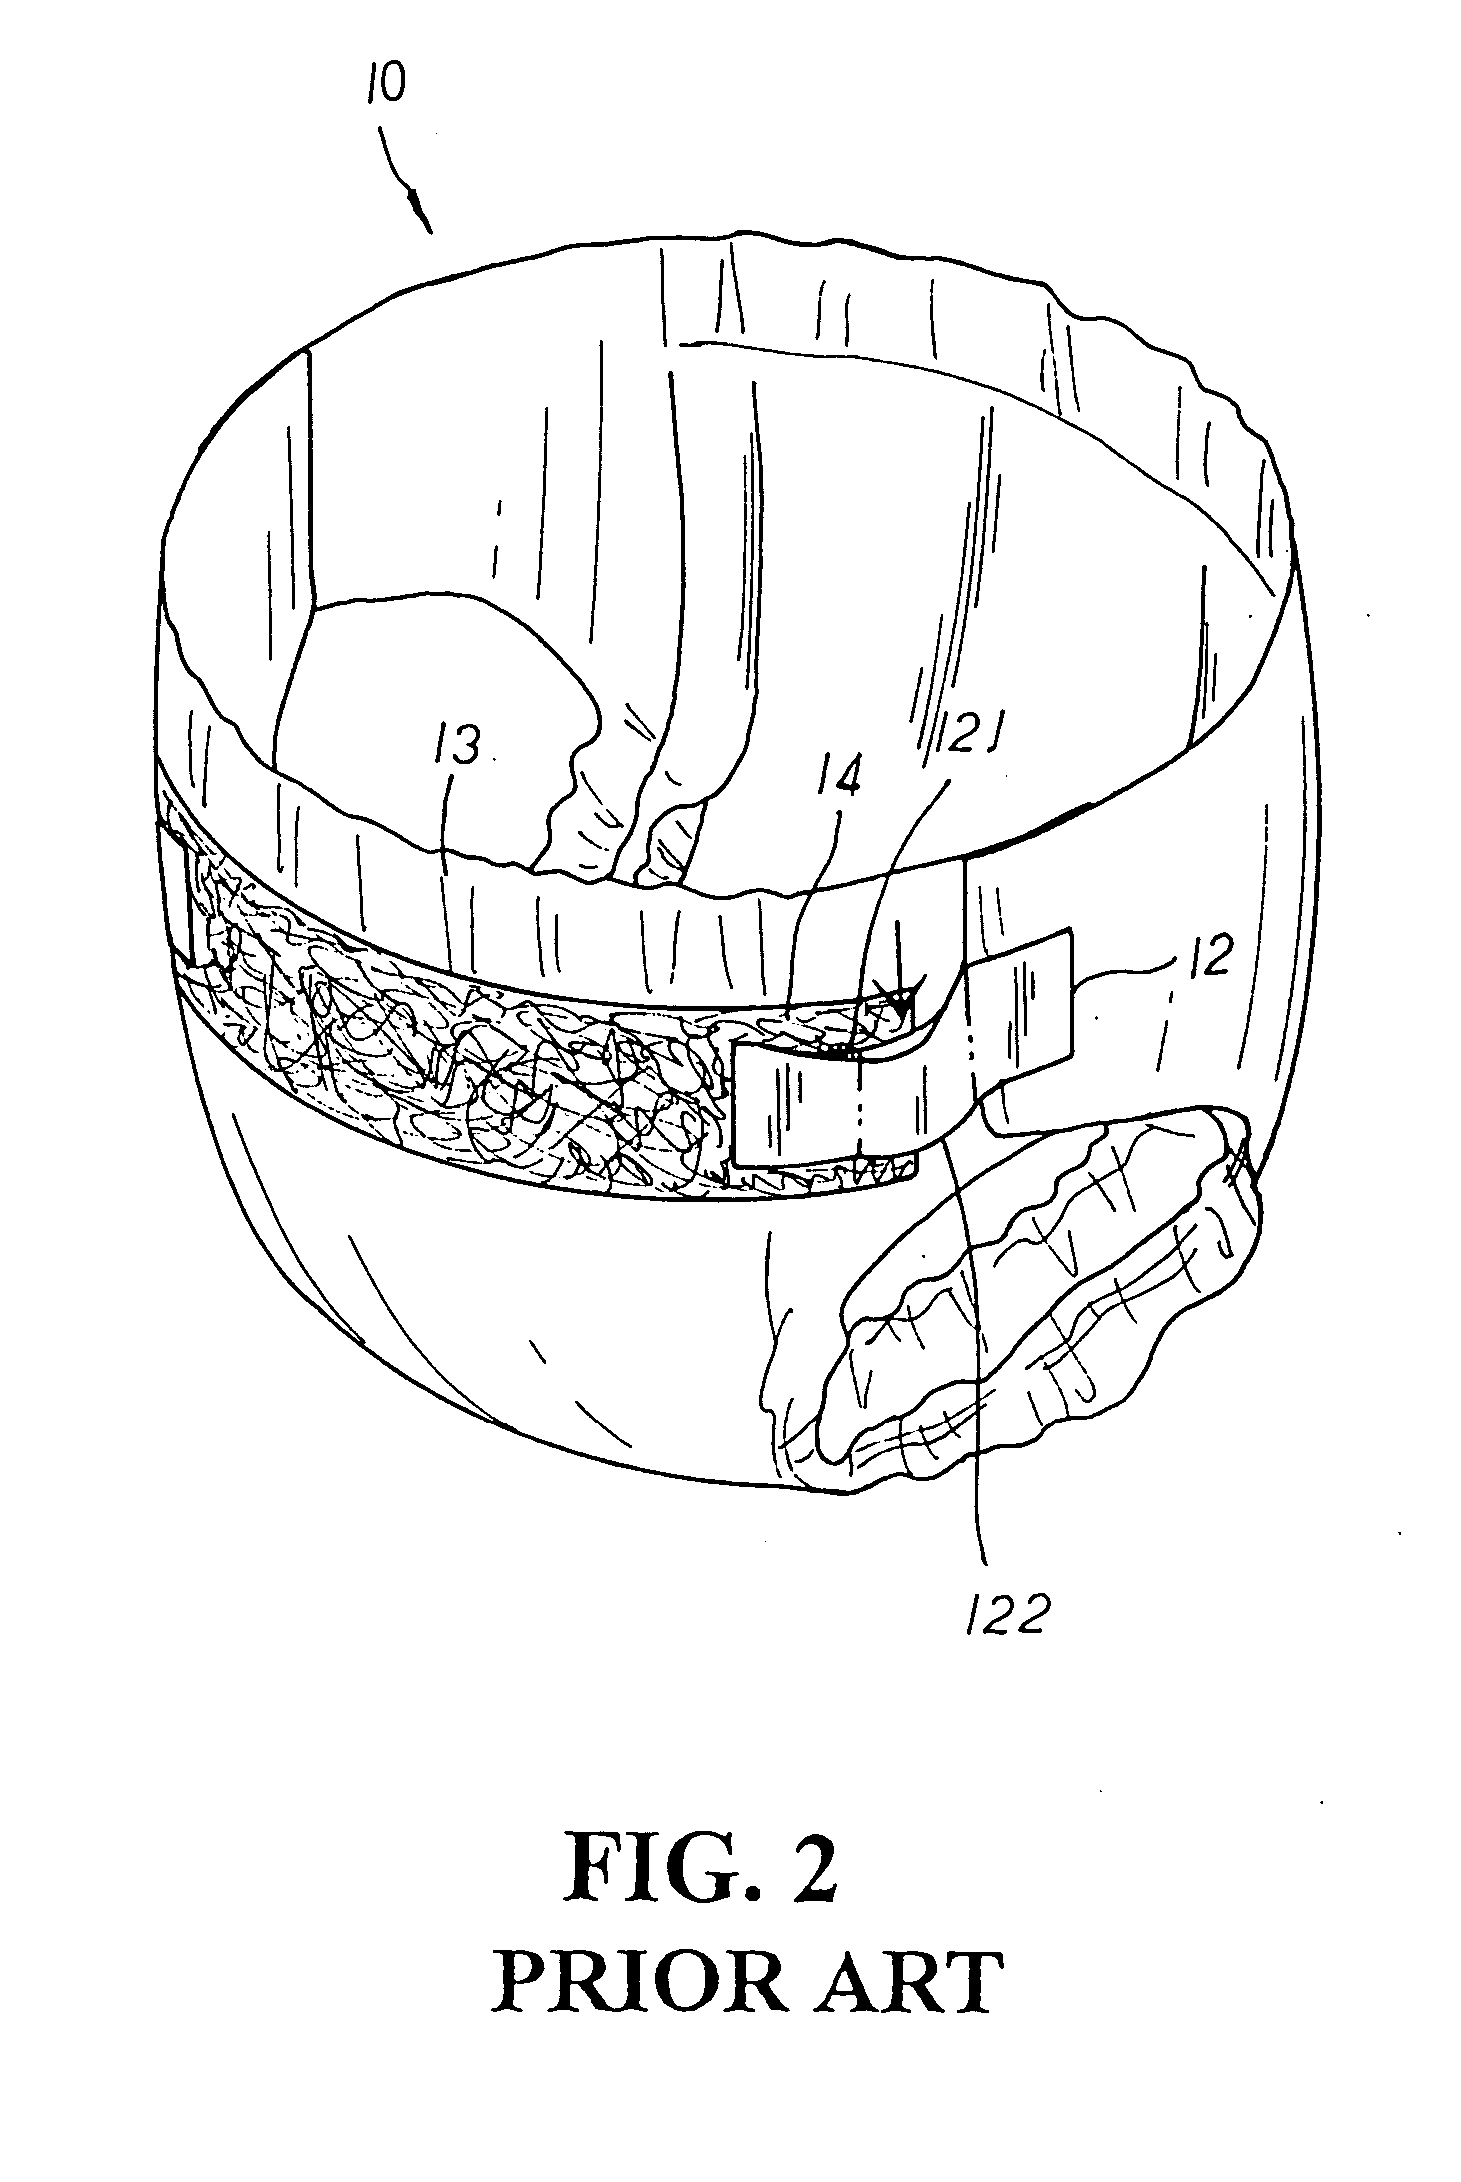 Buckling device for disposable articles